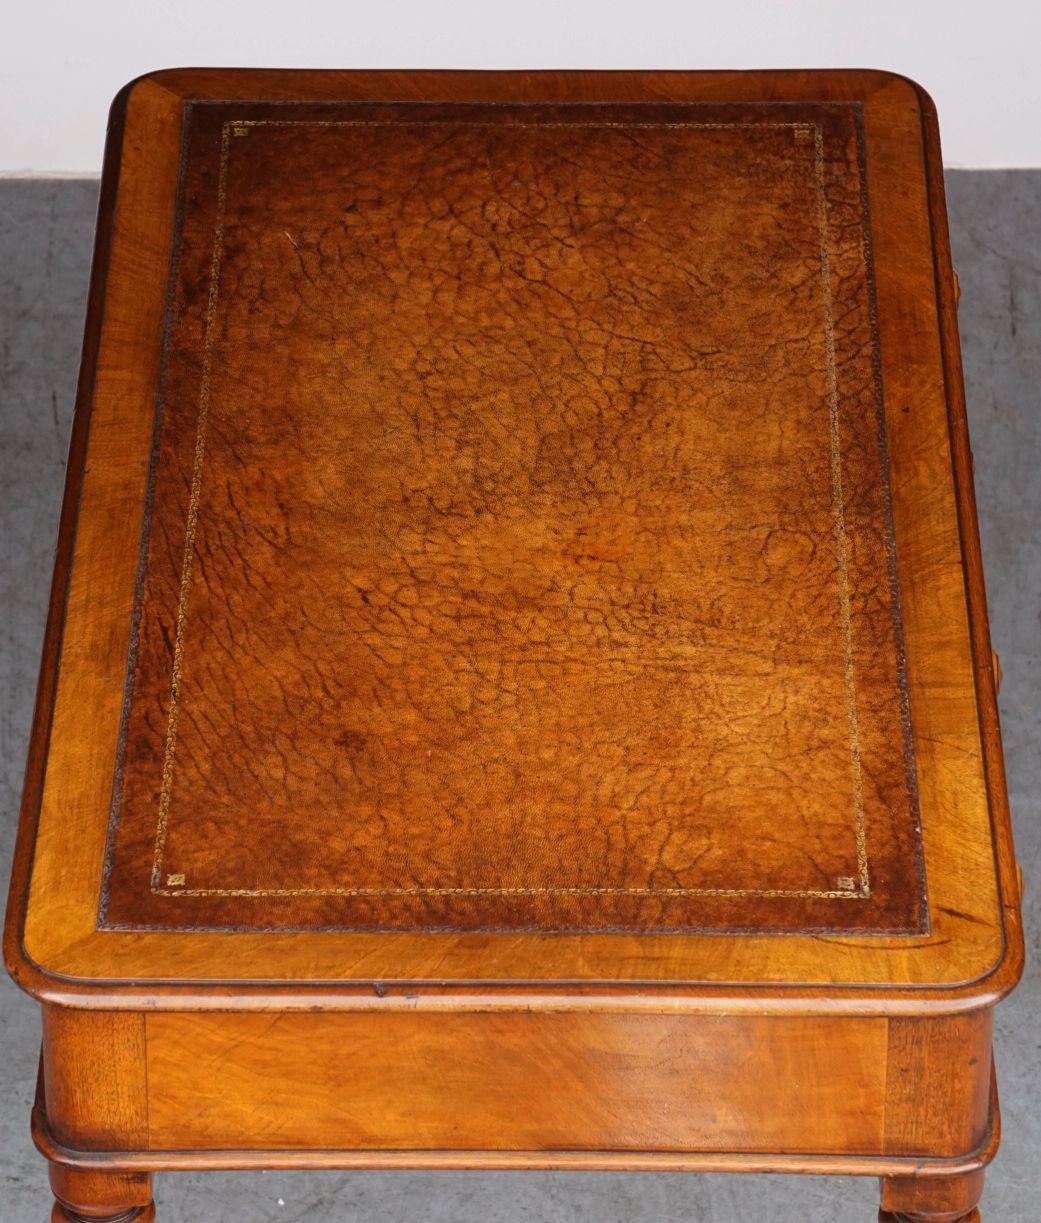 English Writing Desk or Table of Mahogany with Leather Top from the 19th Century 4